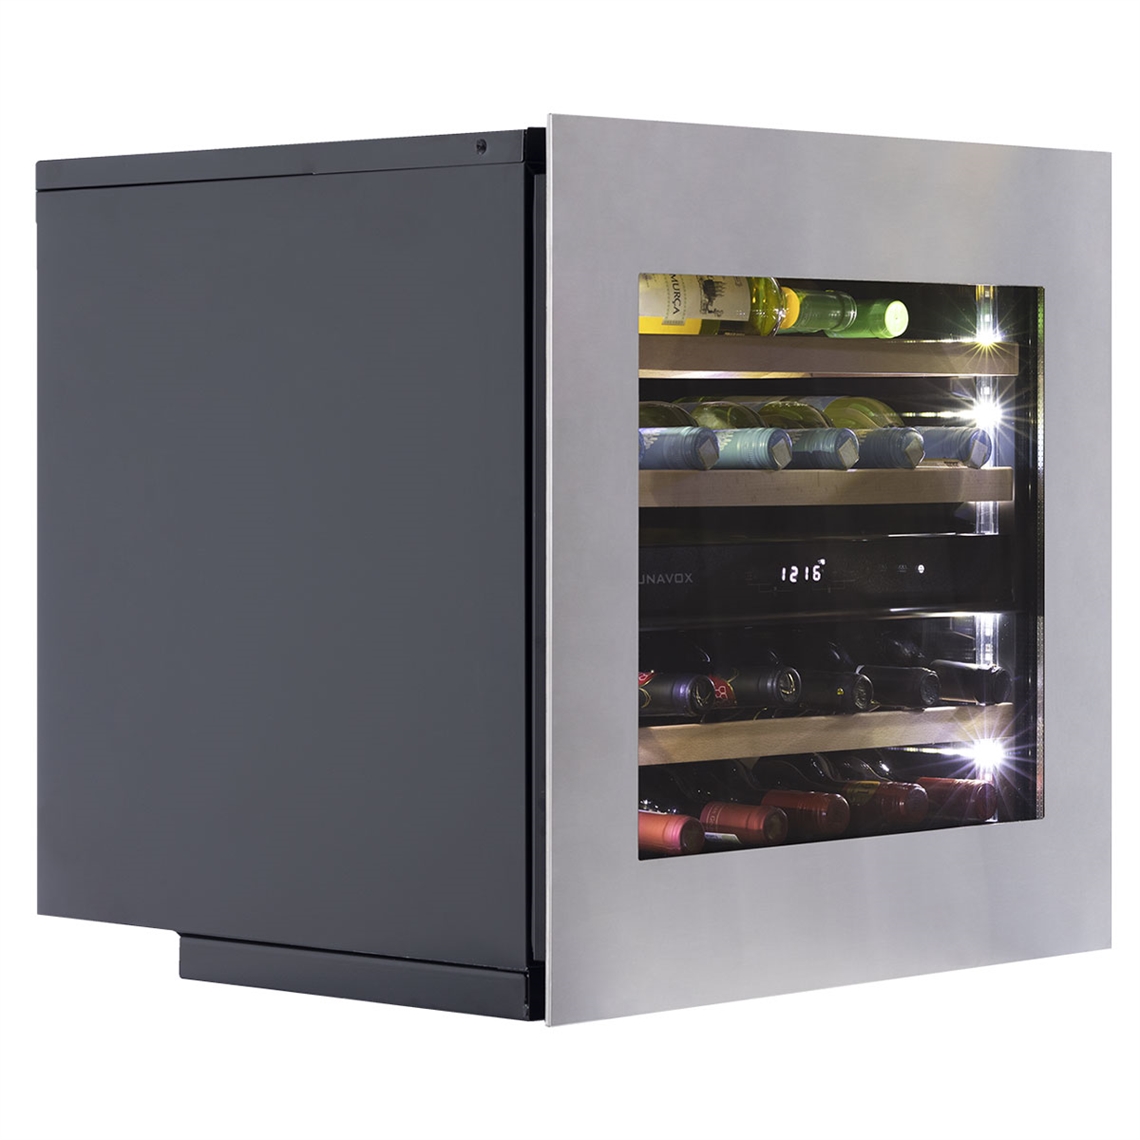 Dunavox Wine Cabinet Glance - 2-Temperature Slot-In - Stainless Steel DAVG-25.63DSS.TO